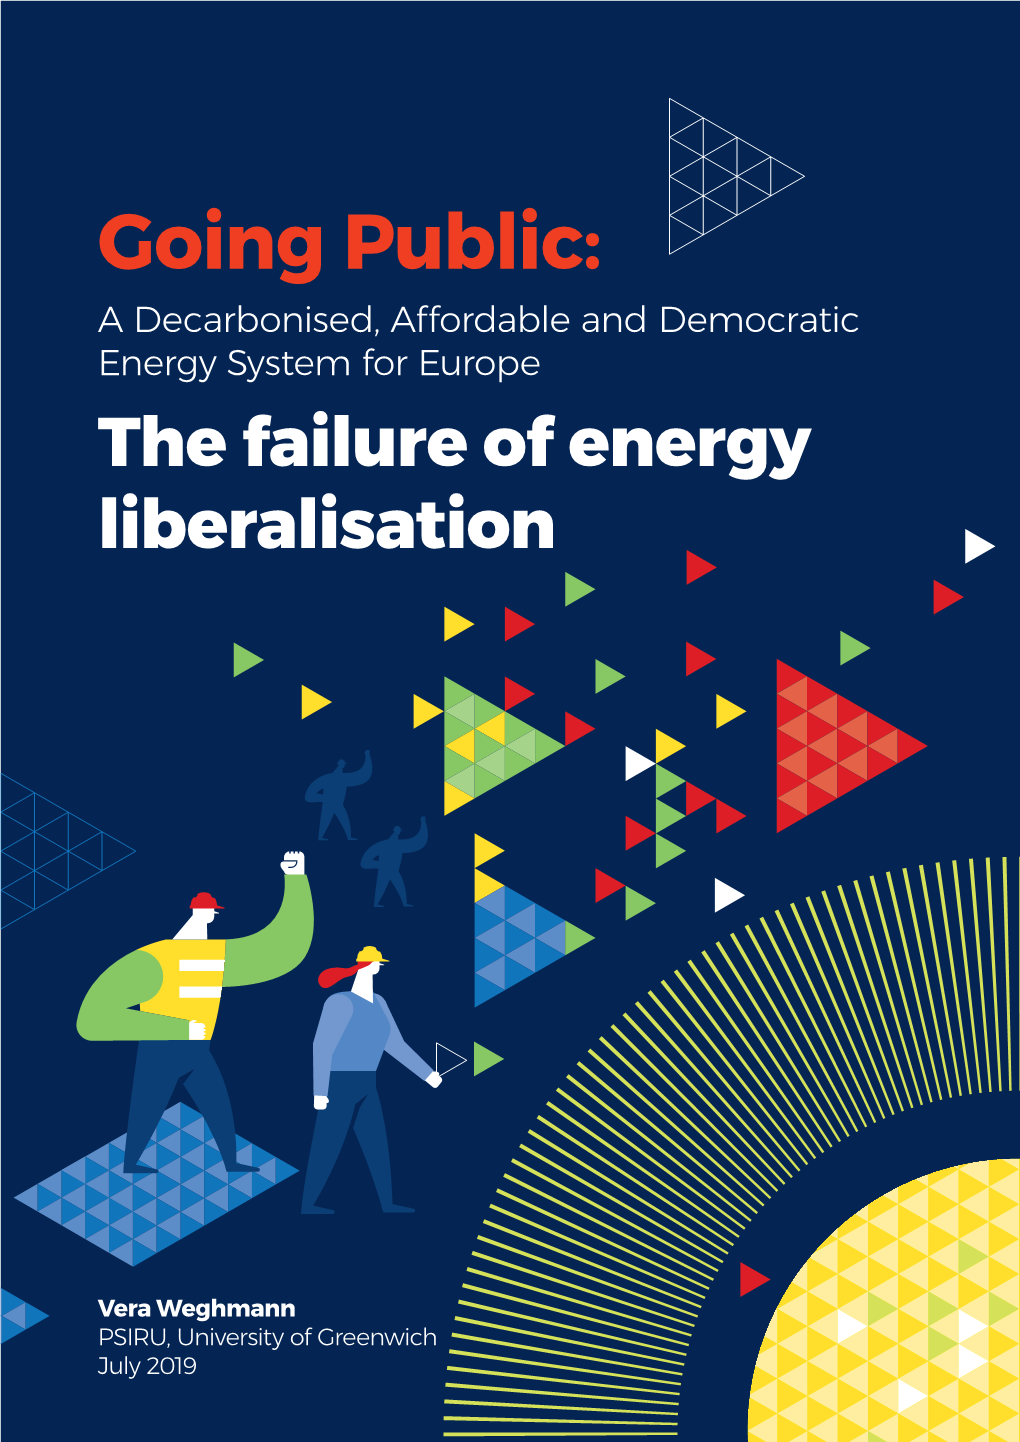 Going Public: a Decarbonised, Affordable and Democratic Energy System for Europe the Failure of Energy Liberalisation